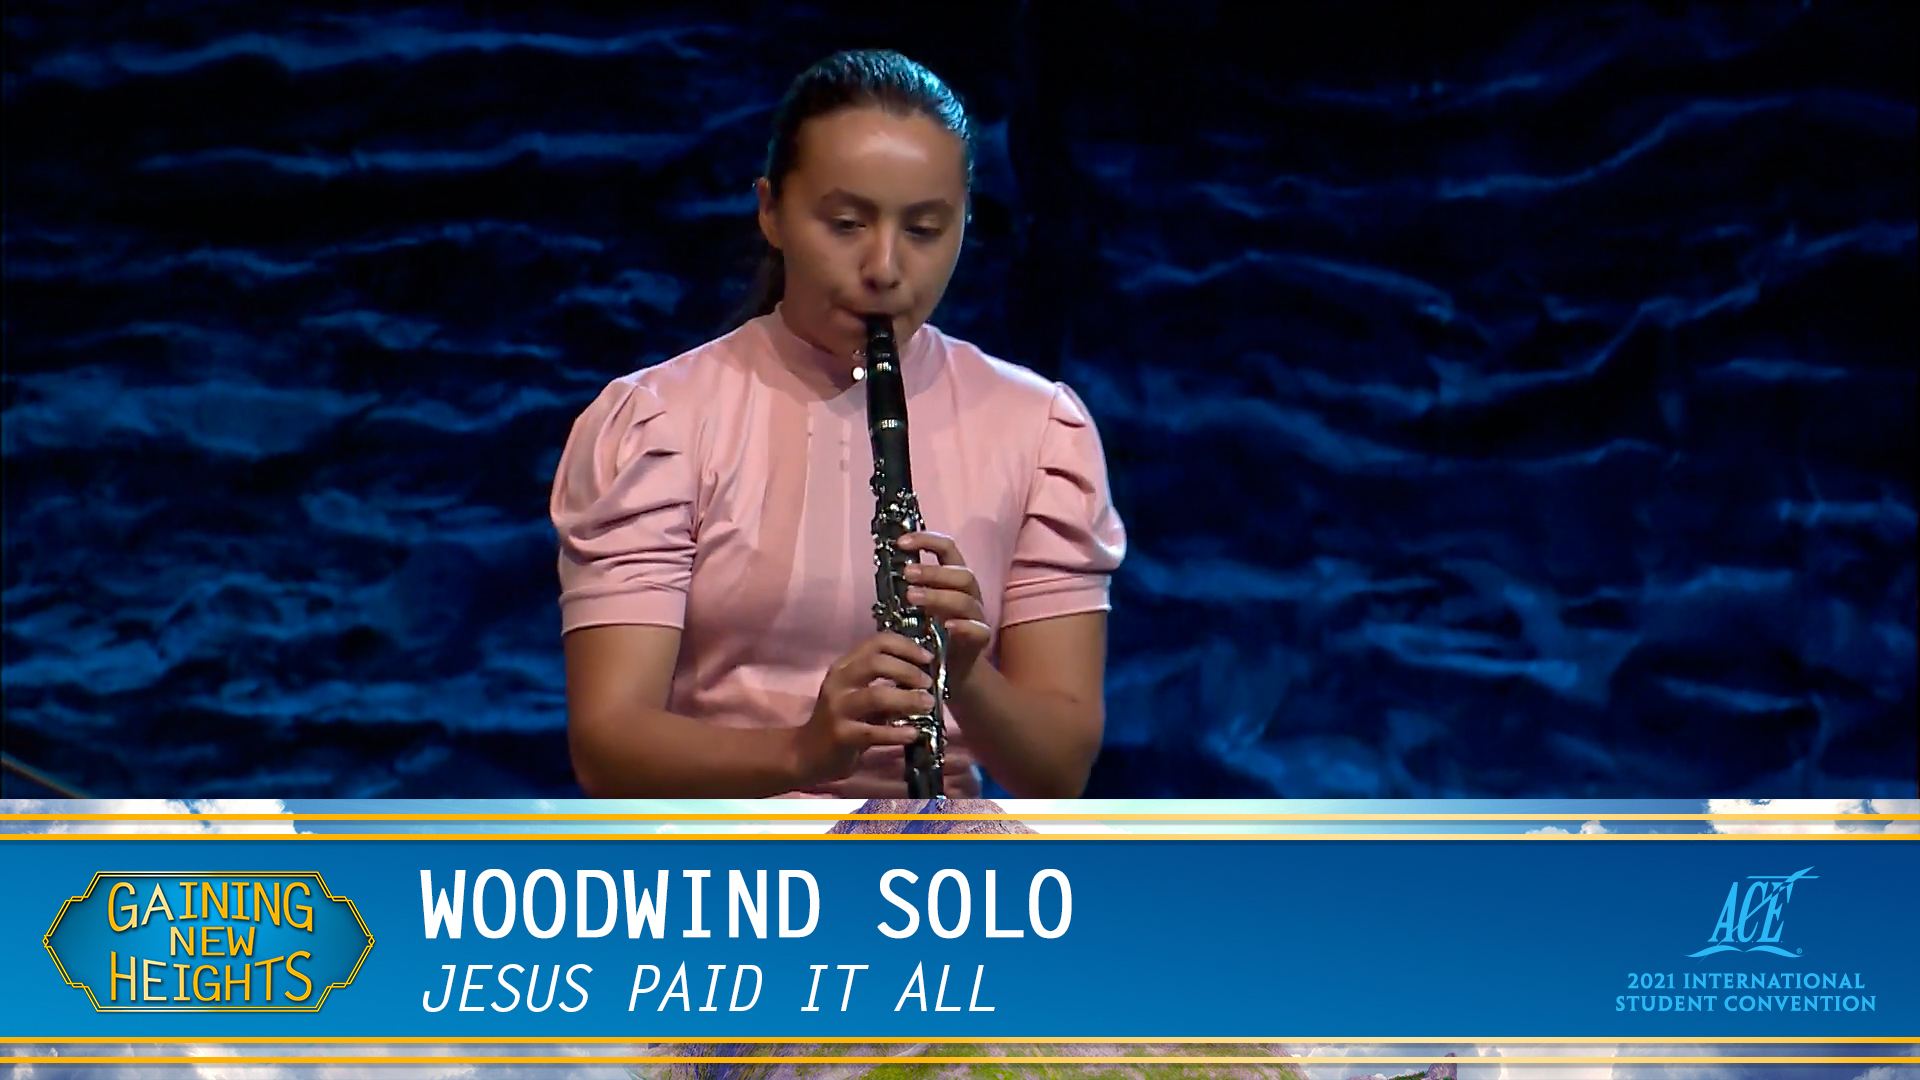 Woodwind Solo, "Jesus Paid It All" - ISC 2021